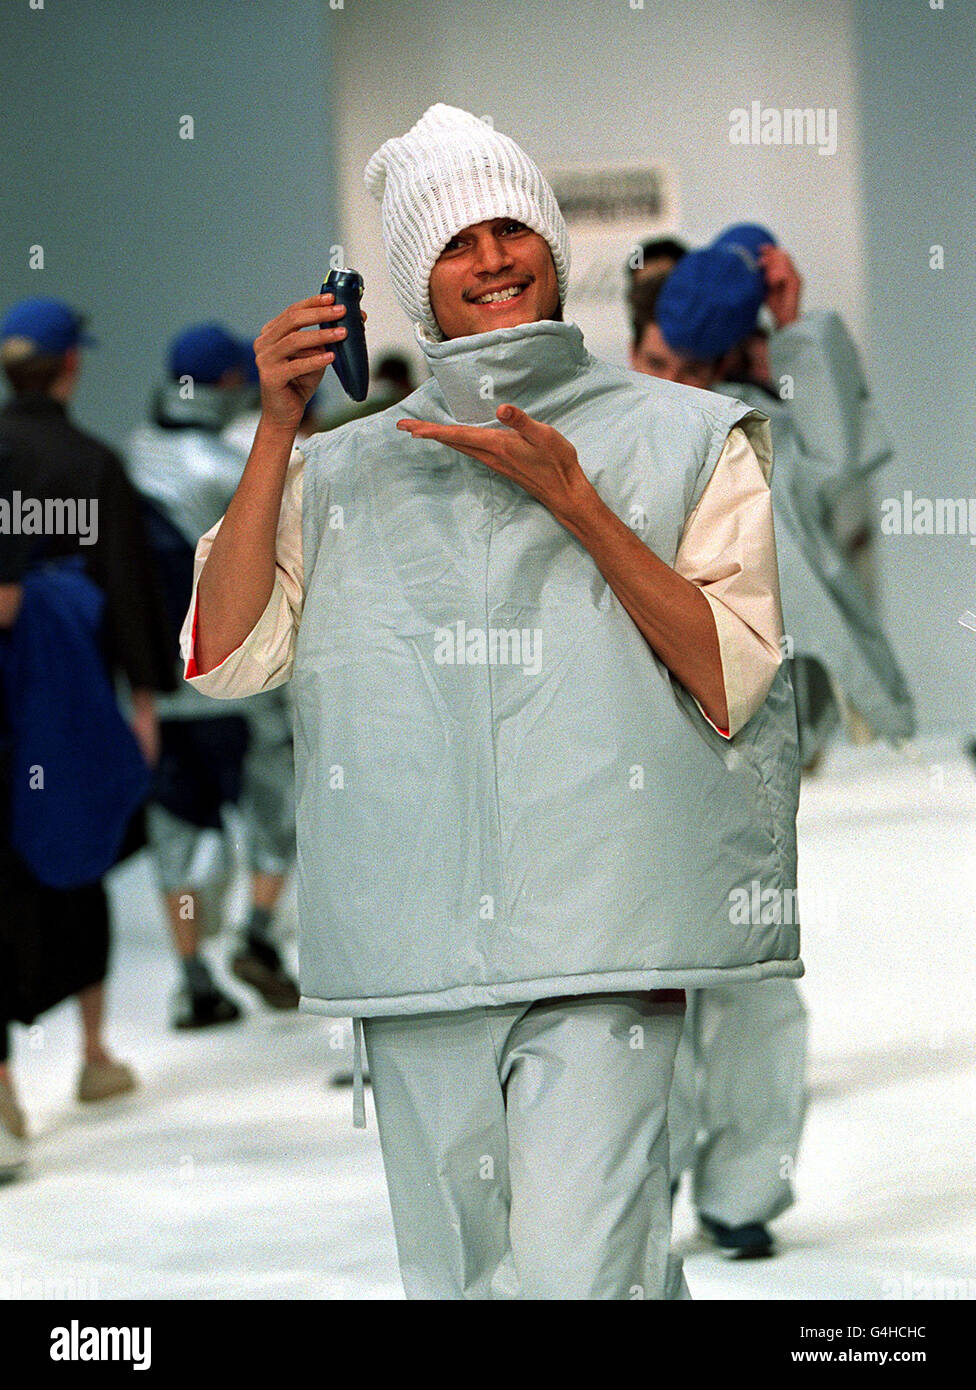 A grinning model holding a phillishave electric shaver presents a light jacket and matching trousers from budding designers at Northbrook College is modelled on the catwalk at the Royal Horticultural Halls in London as part of Men's Fashion Week. Stock Photo